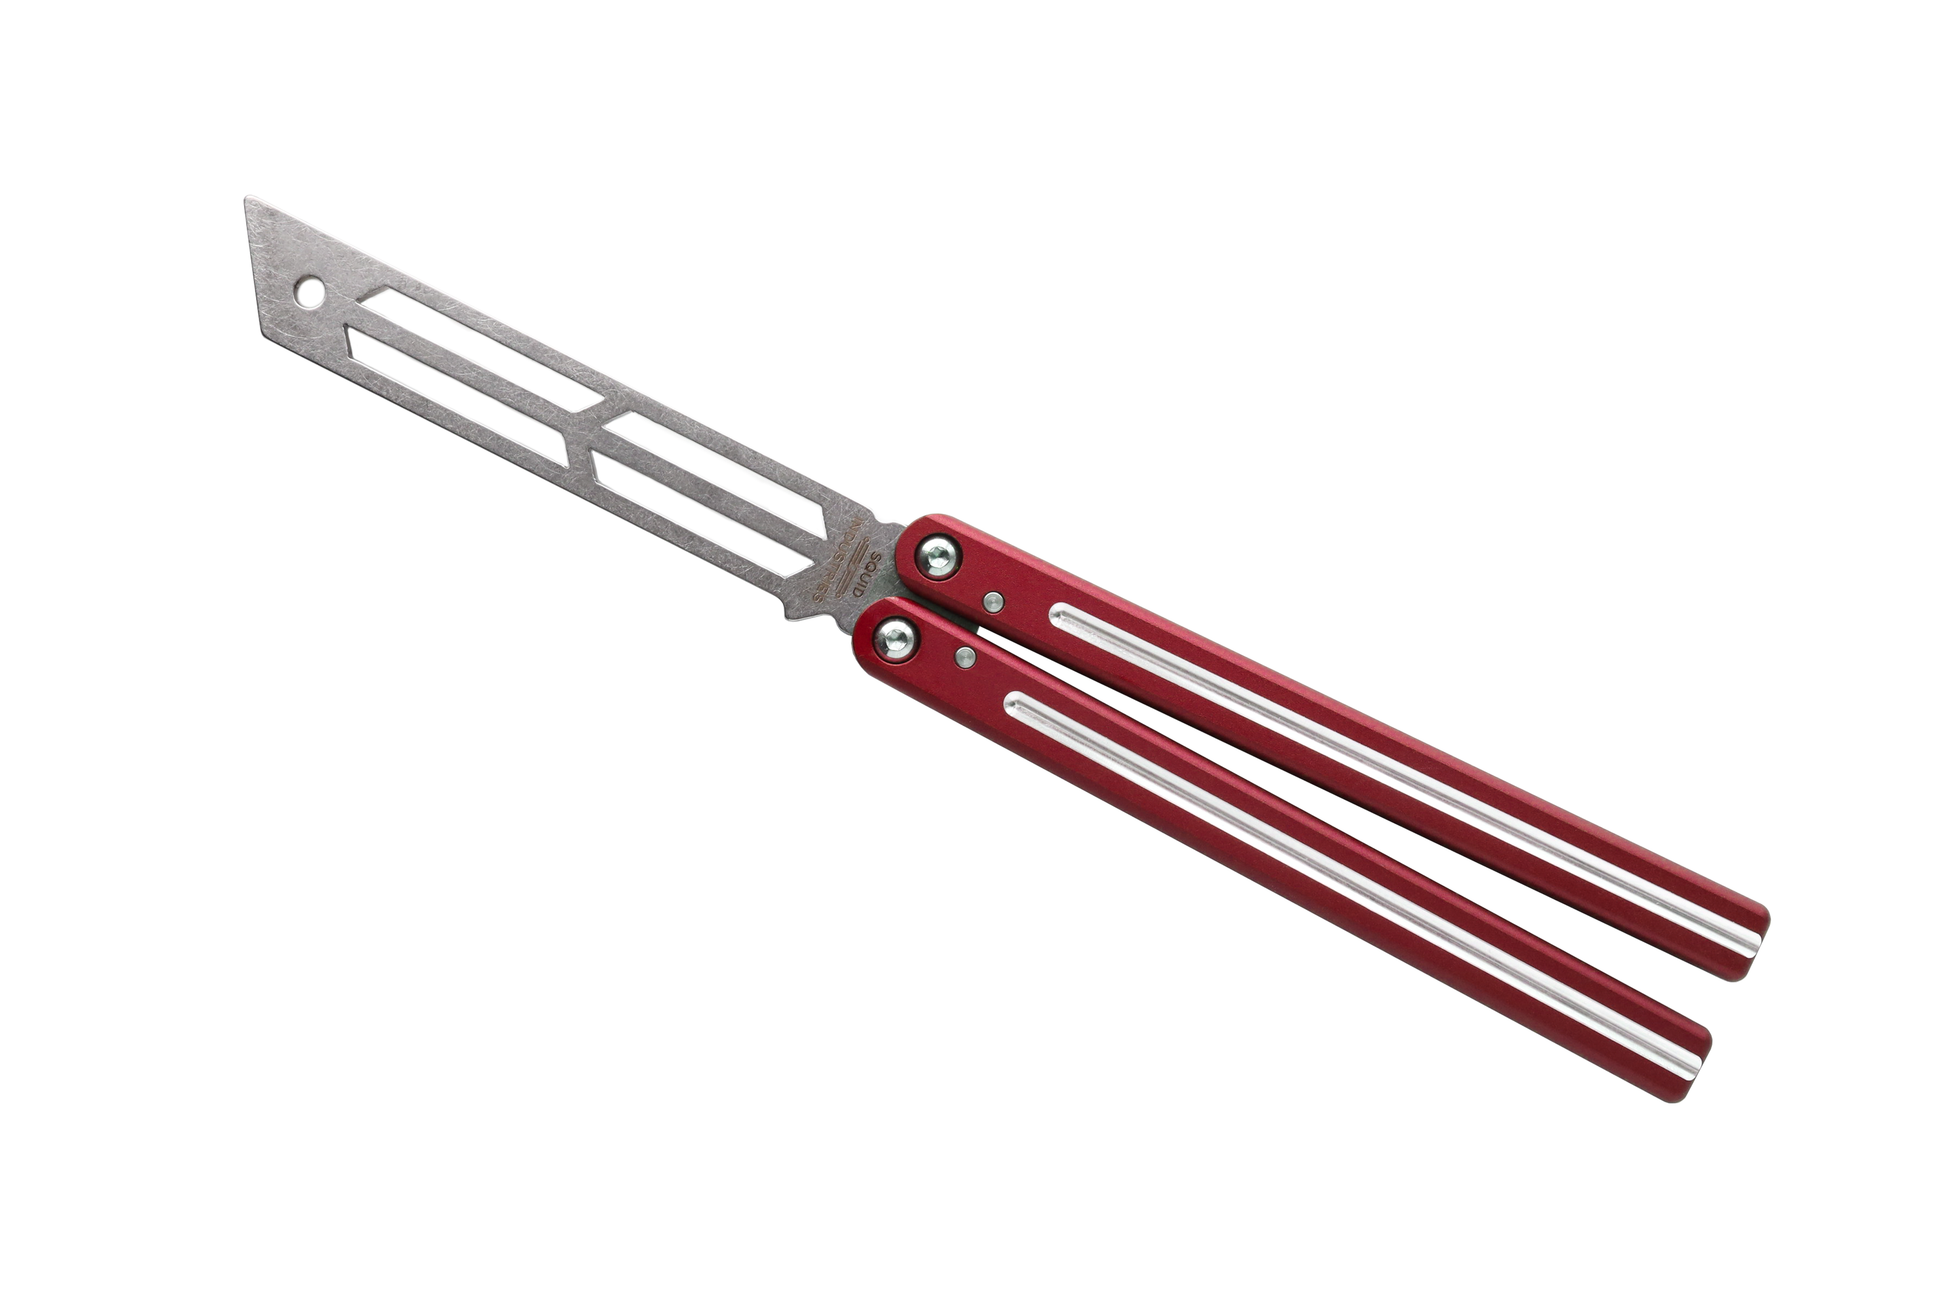 Dual-Tone Red Triton V2 Clearance Blemished Balisong Butterfly Knife Trainer